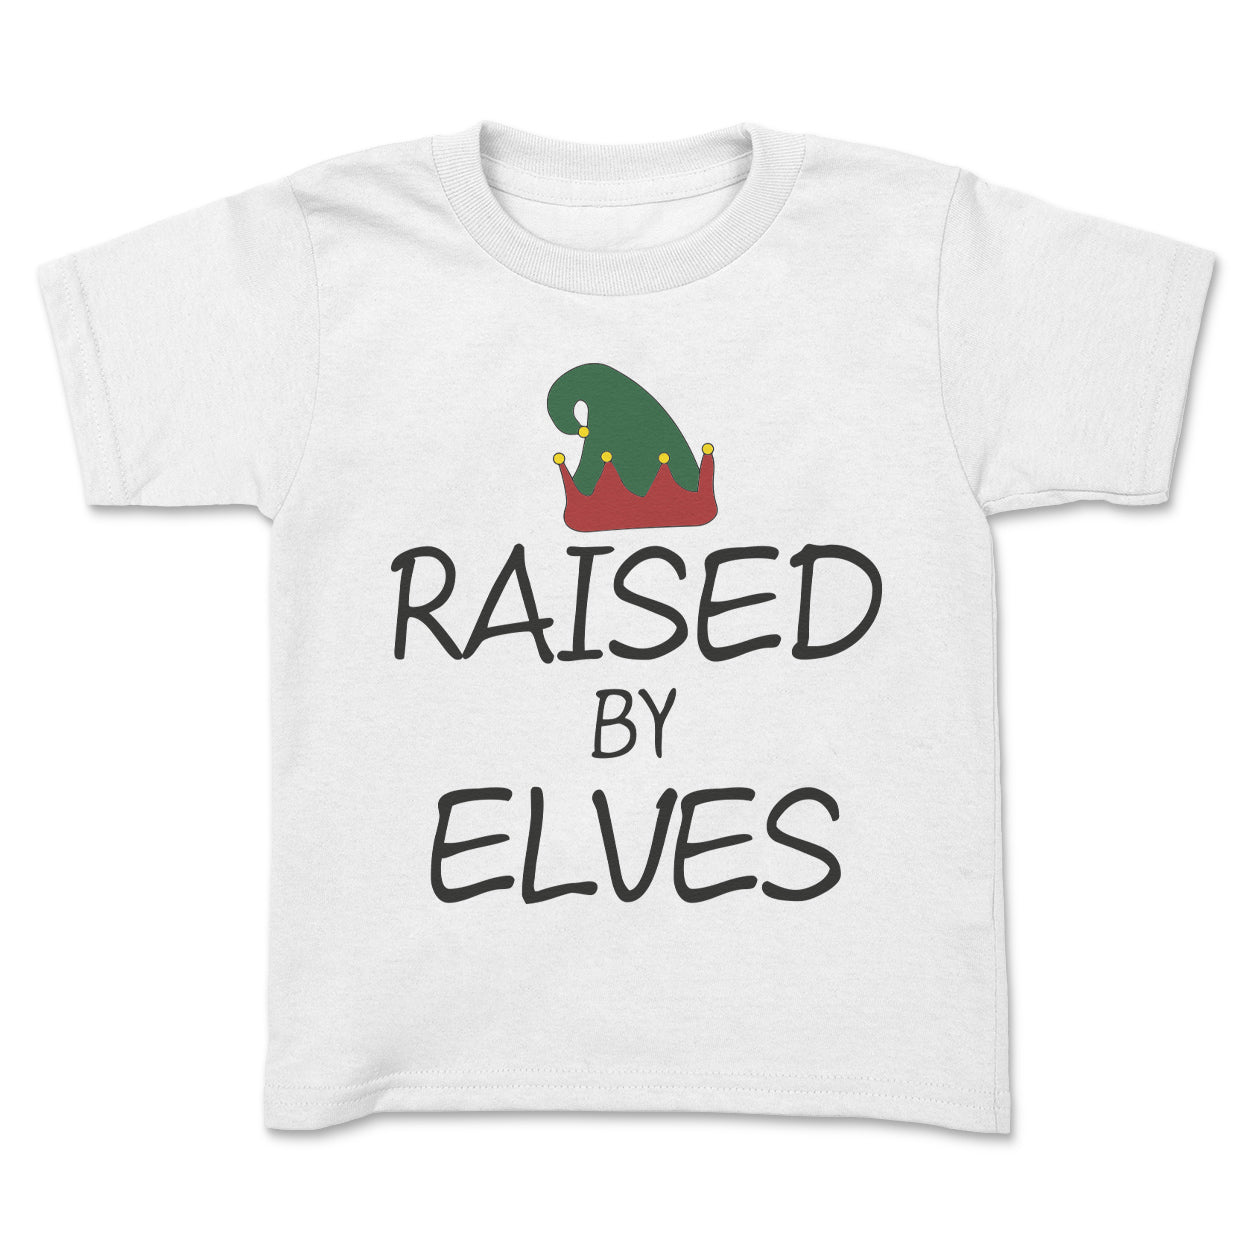 Raised By Elves - Baby & Kids - All Styles & Sizes